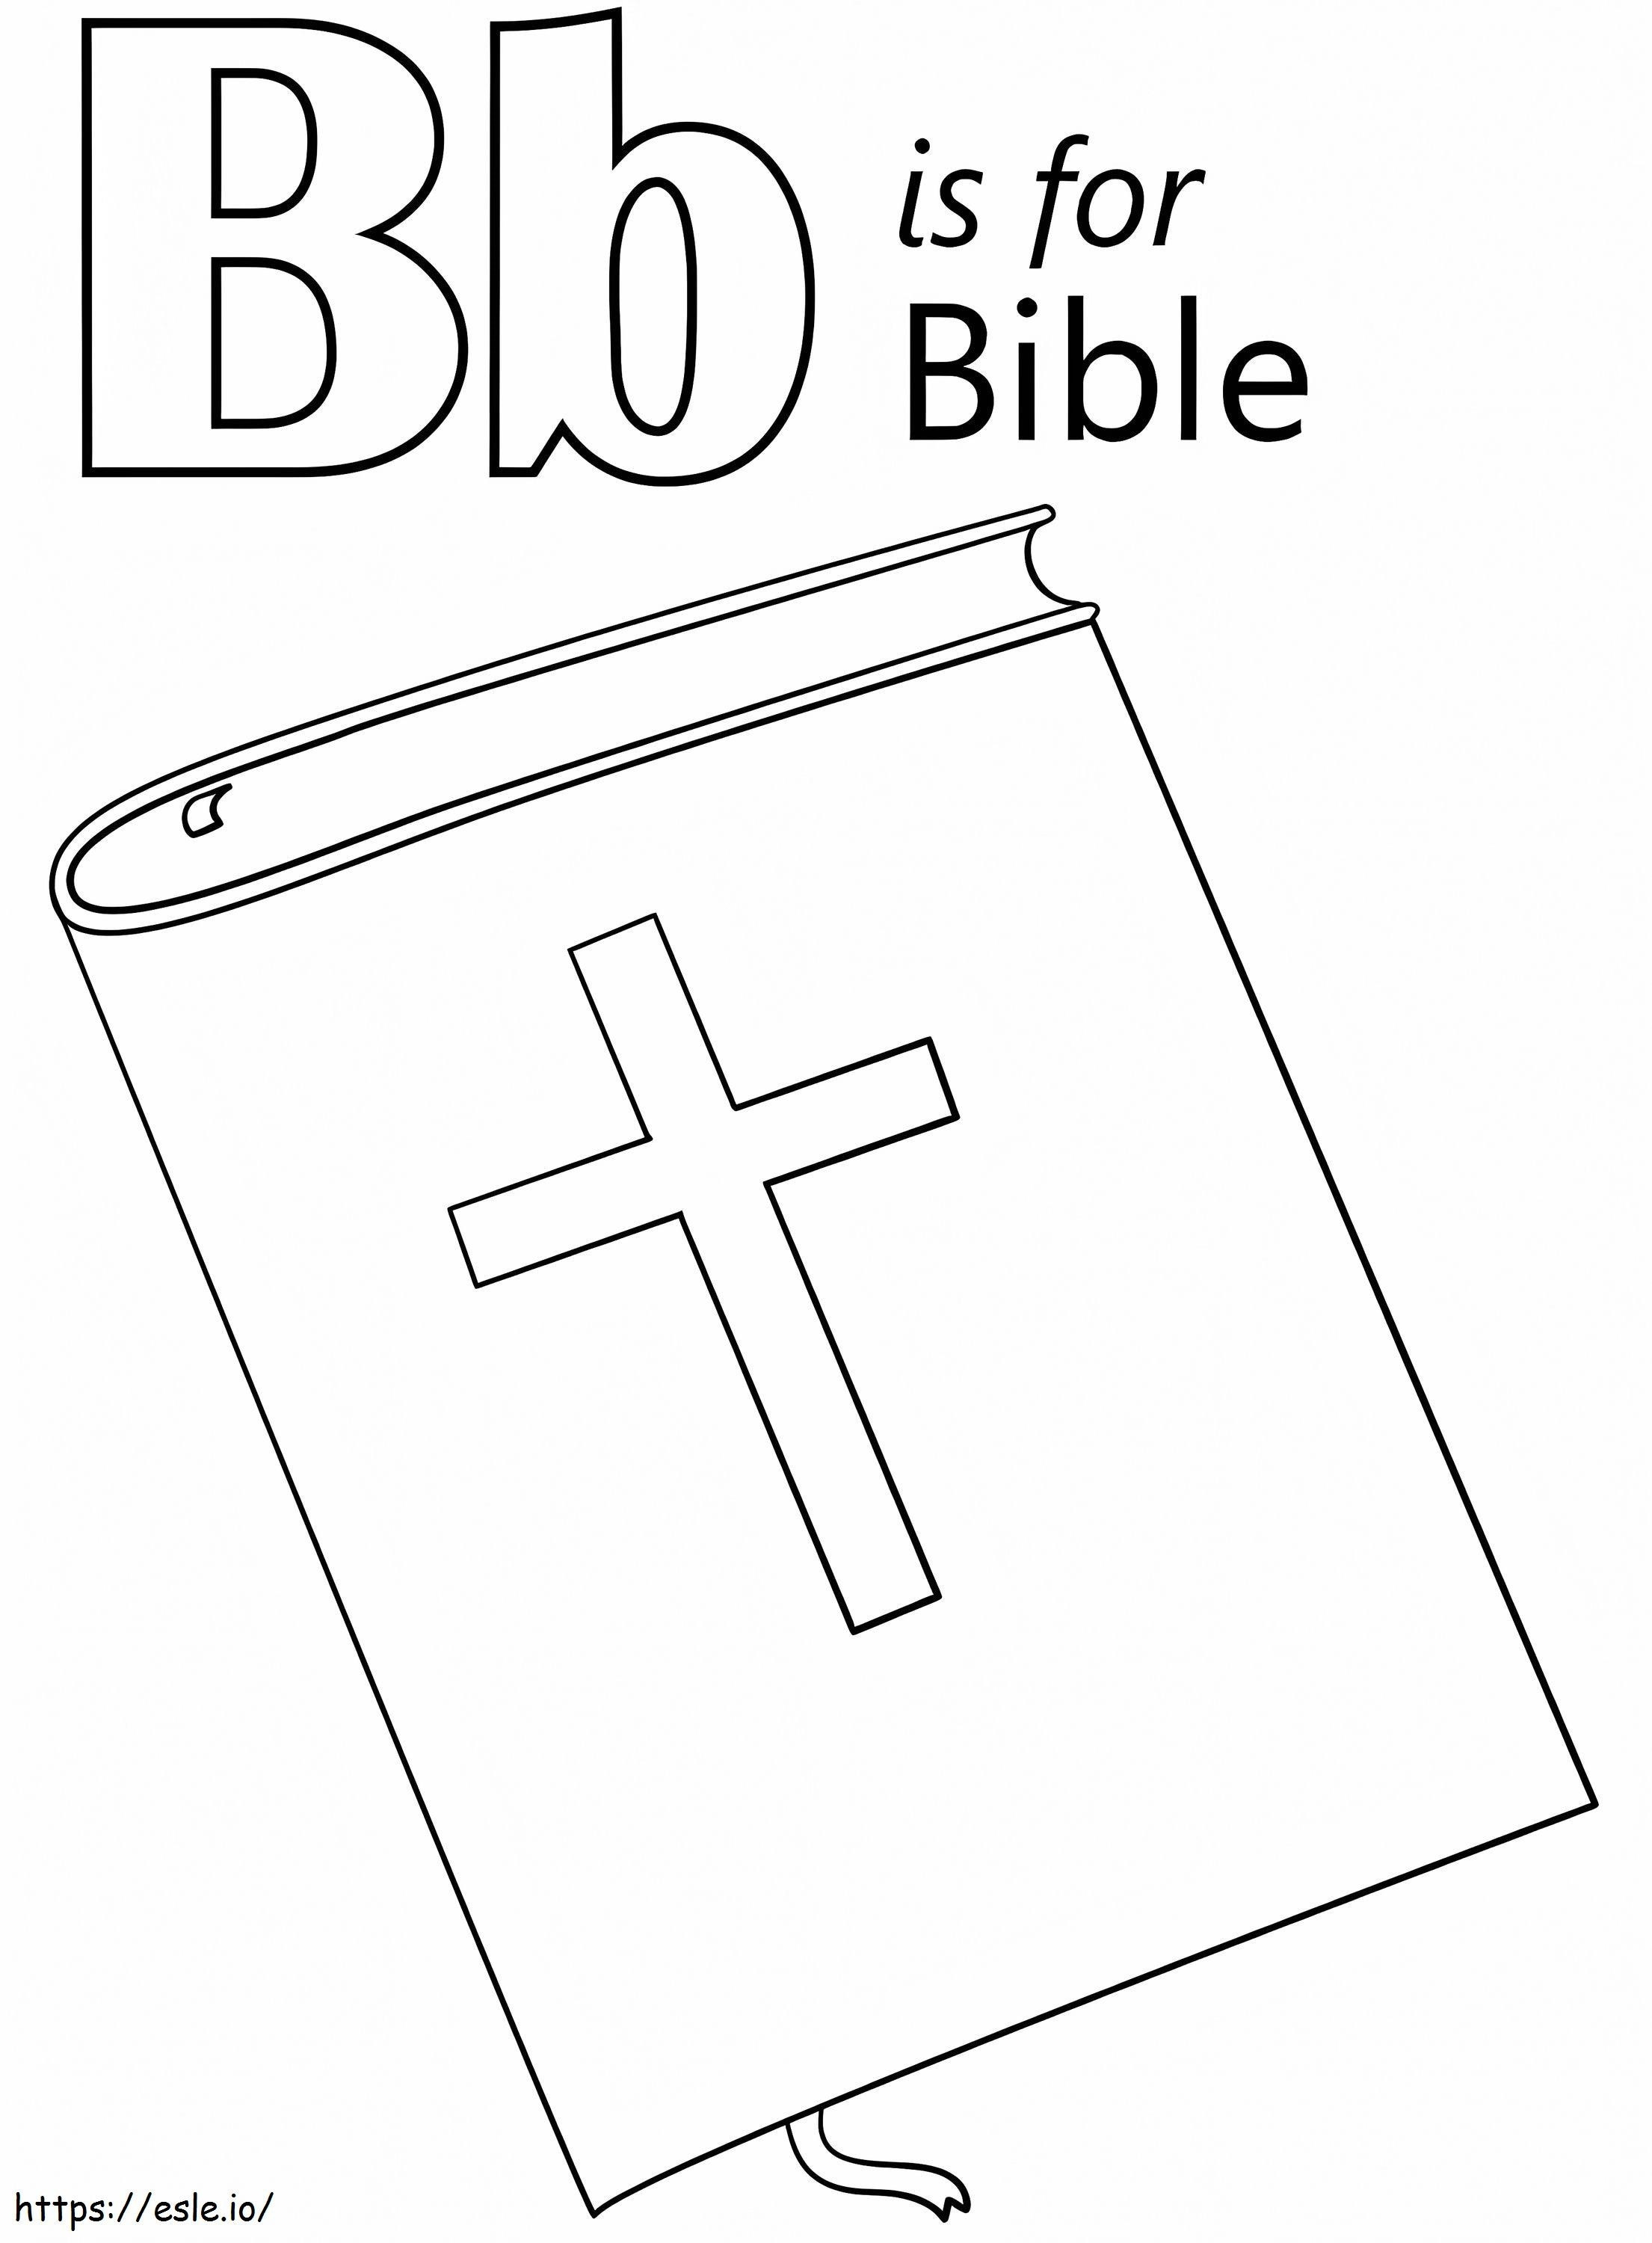 Bible Letter B coloring page